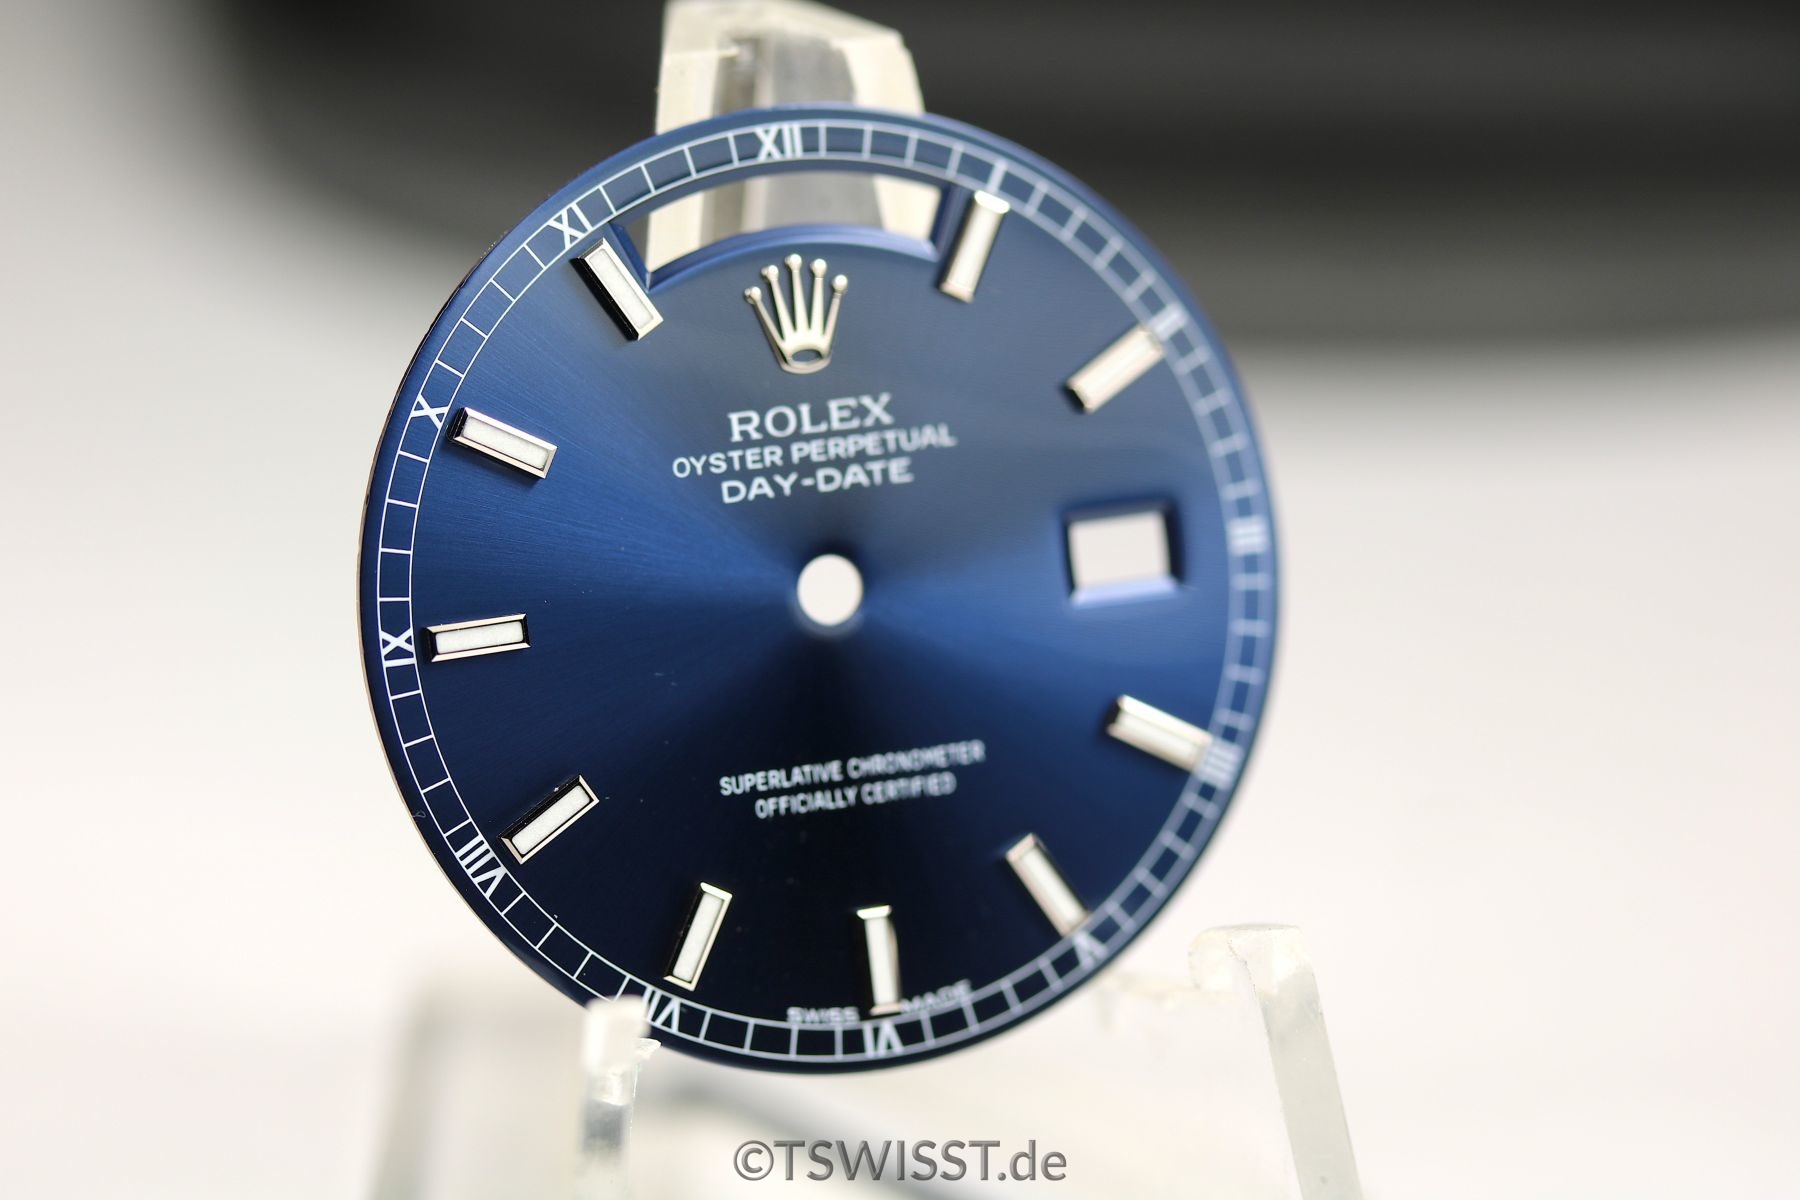 Rolex Day Date dial & hands